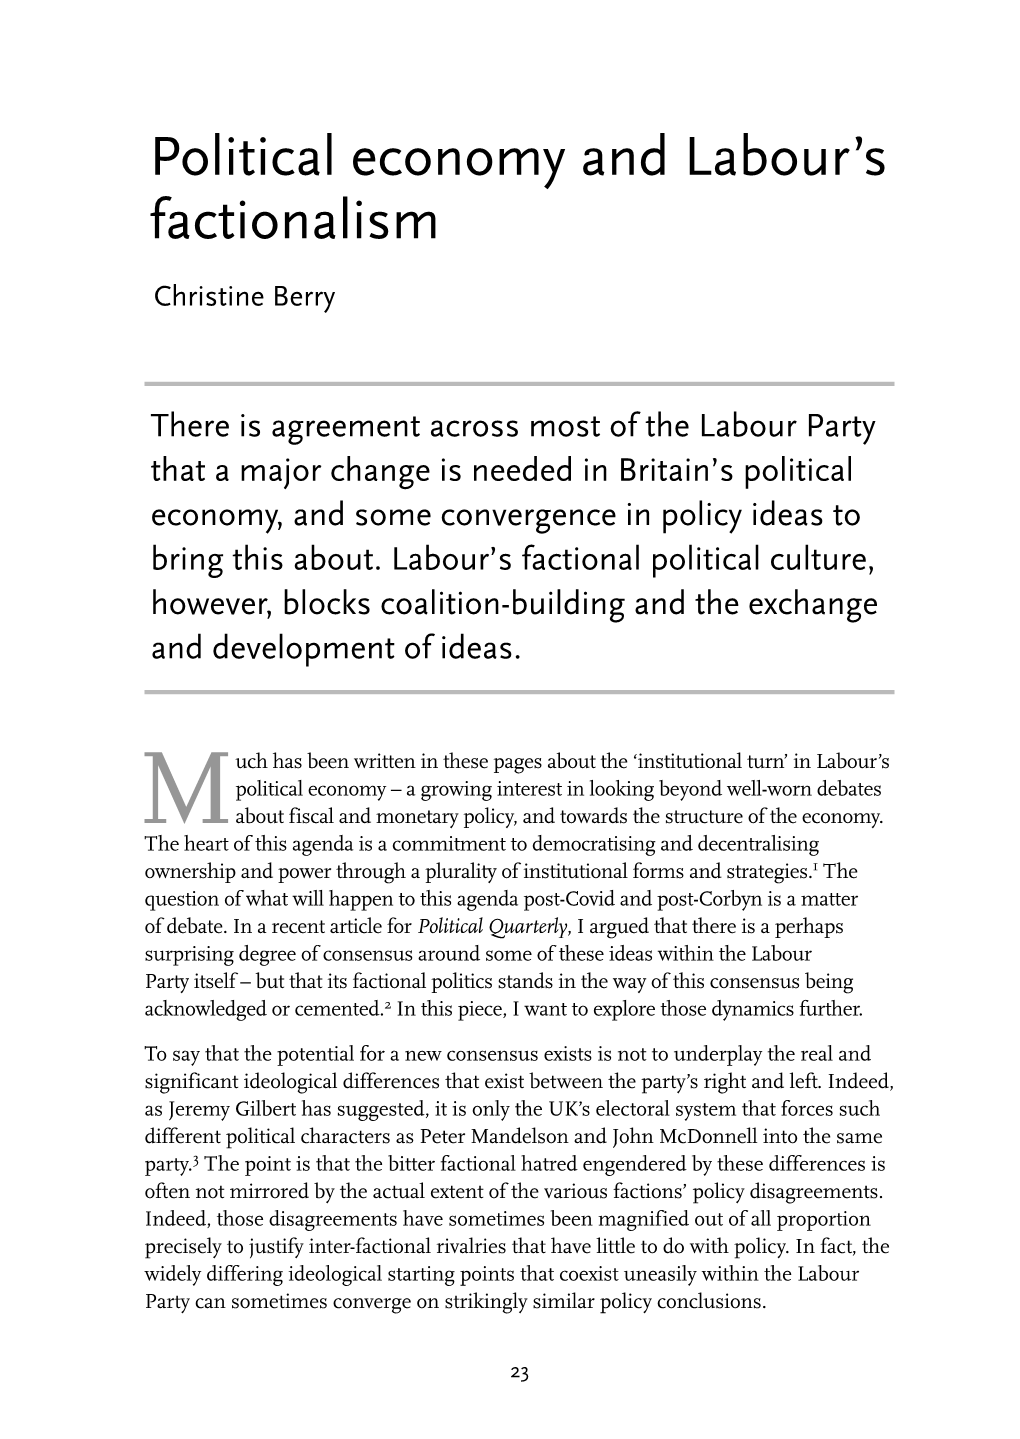 Political Economy and Labour's Factionalism